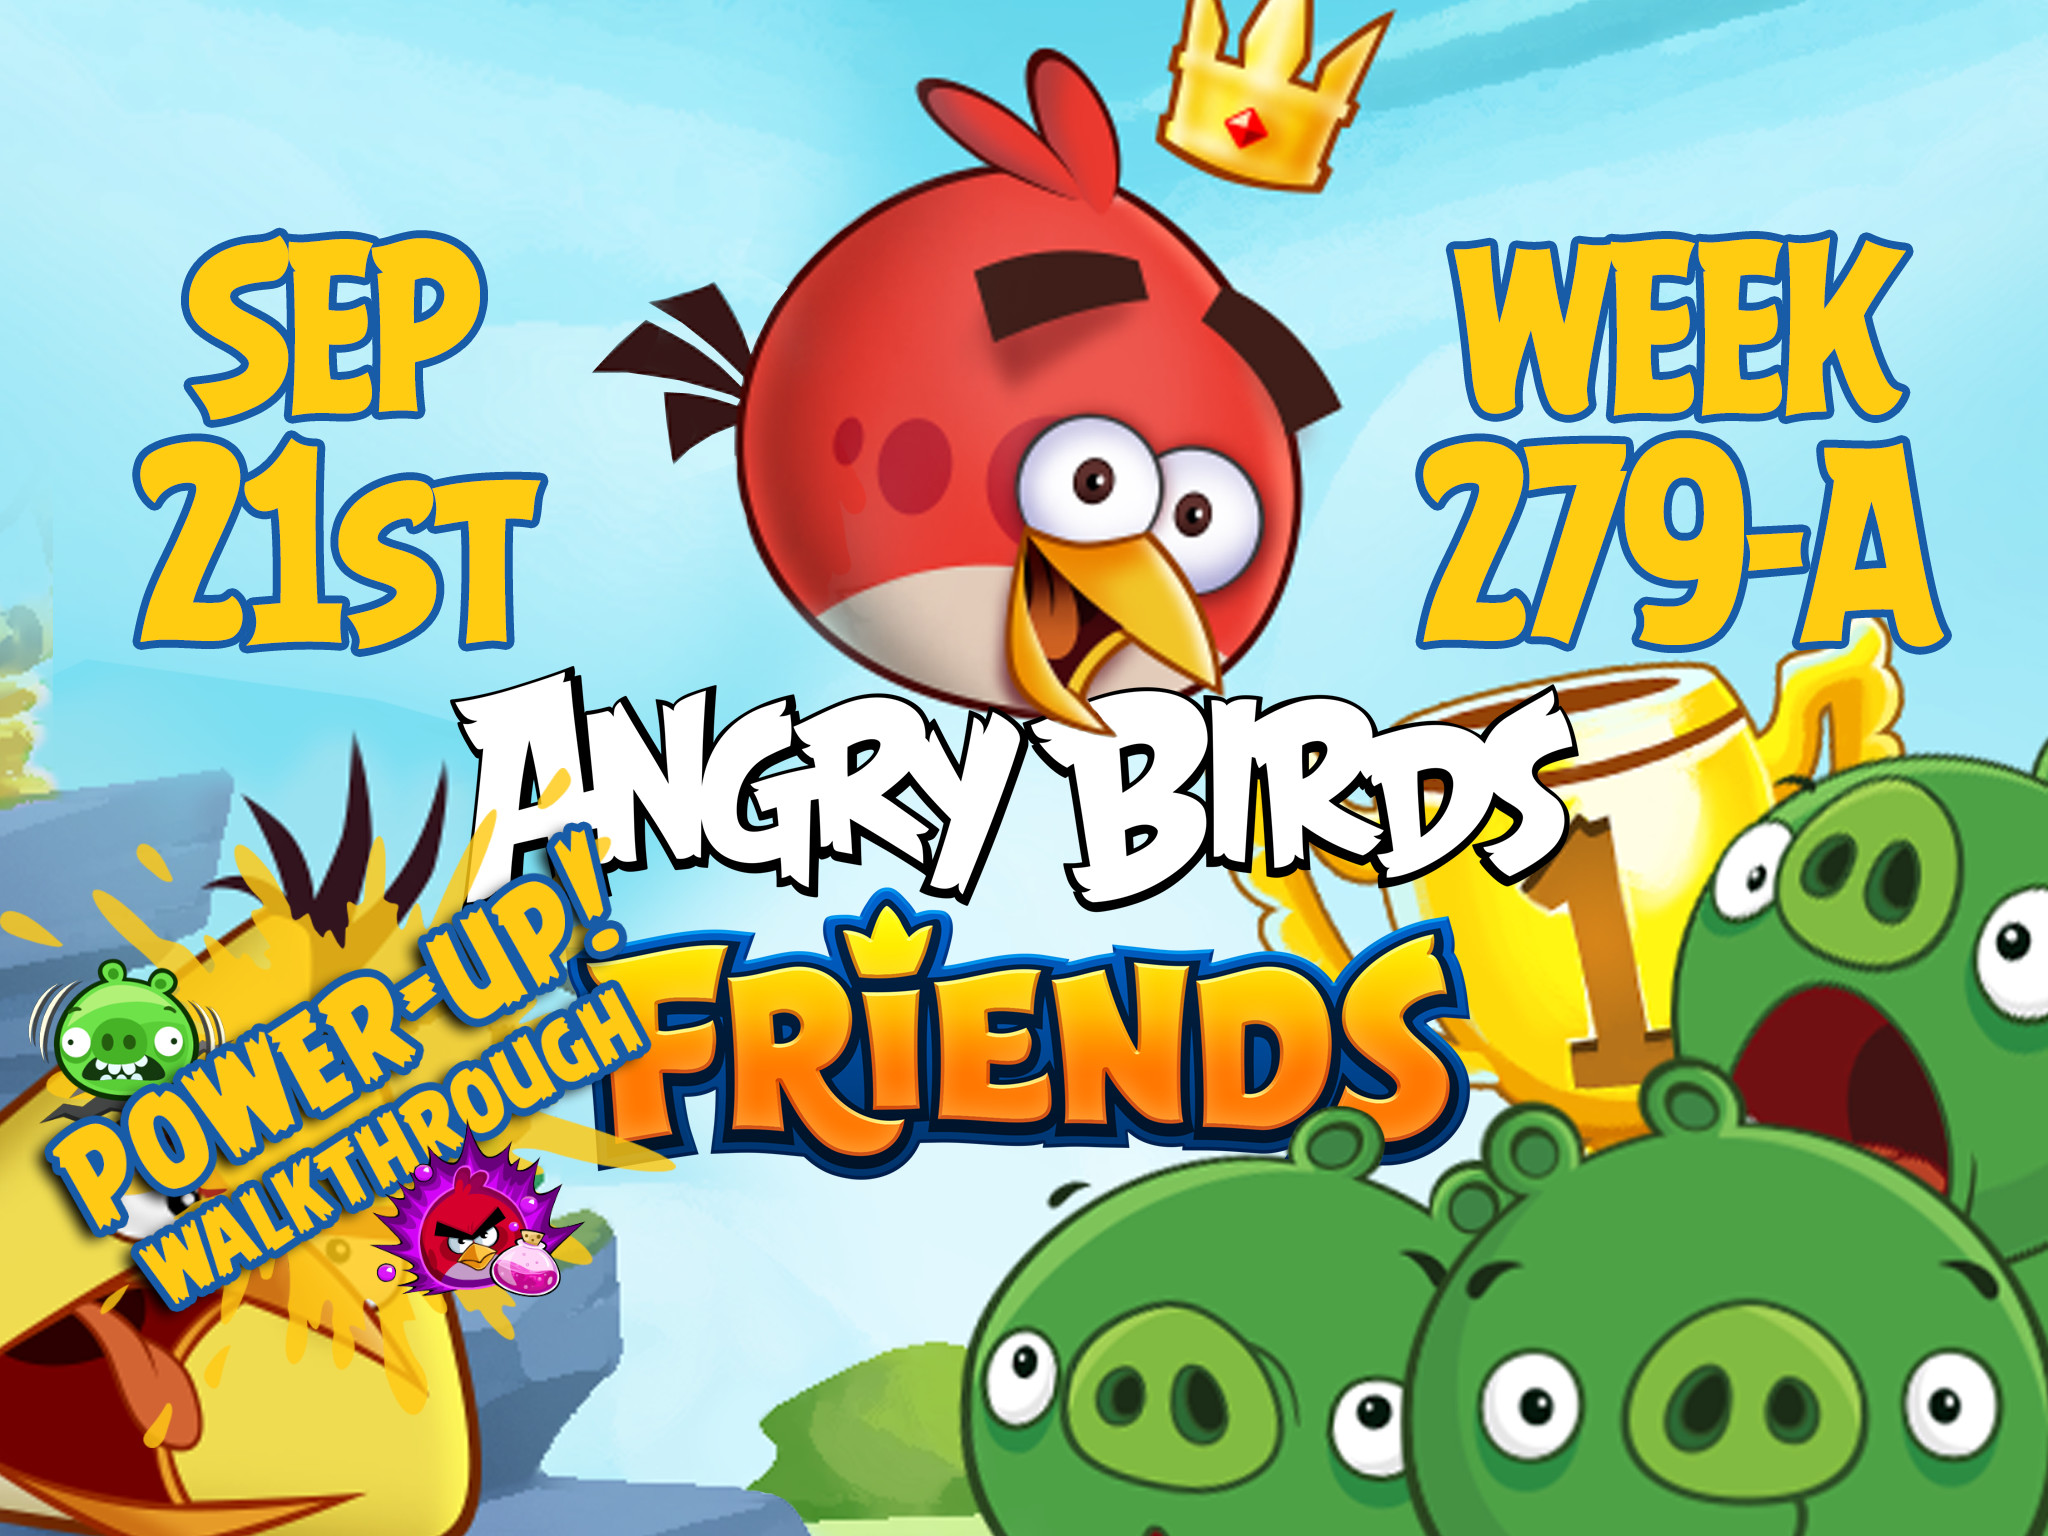 Angry Birds Friends Tournament Week 279-A Feature Image PU